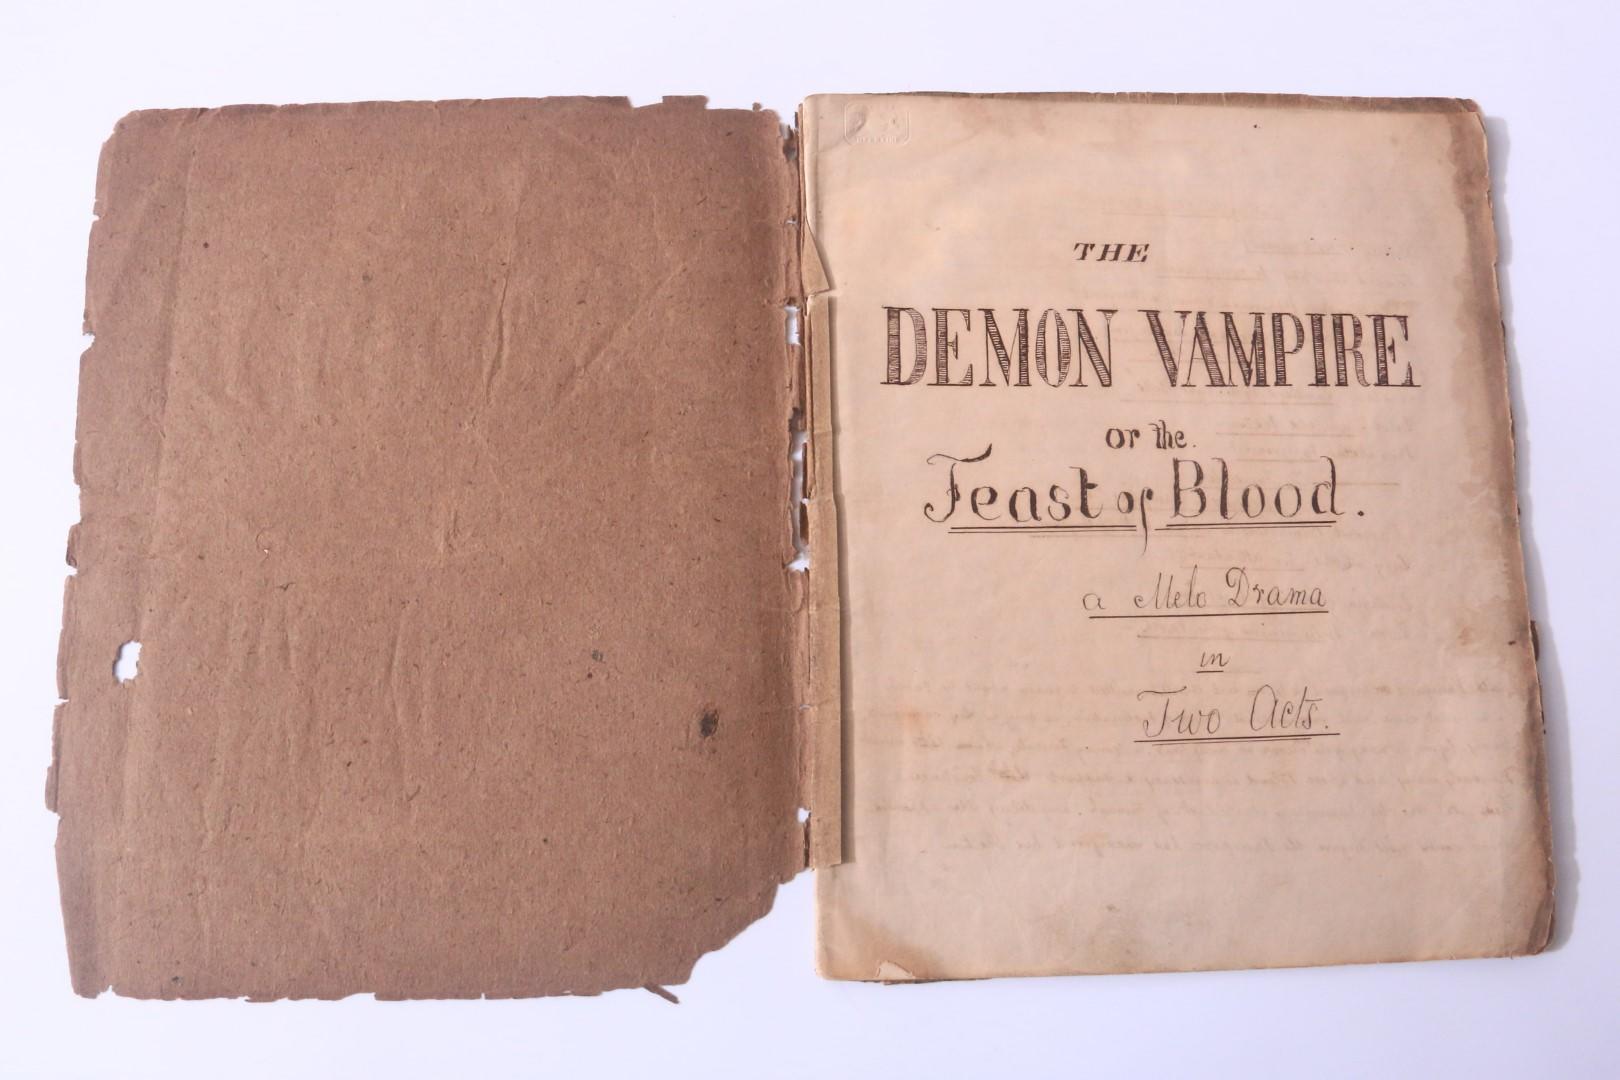 Anonymous - The Demon Vampire or the Feast of Blood, A Melo Drama in Two Acts - No Publisher, No Date [c1850s], Manuscript.